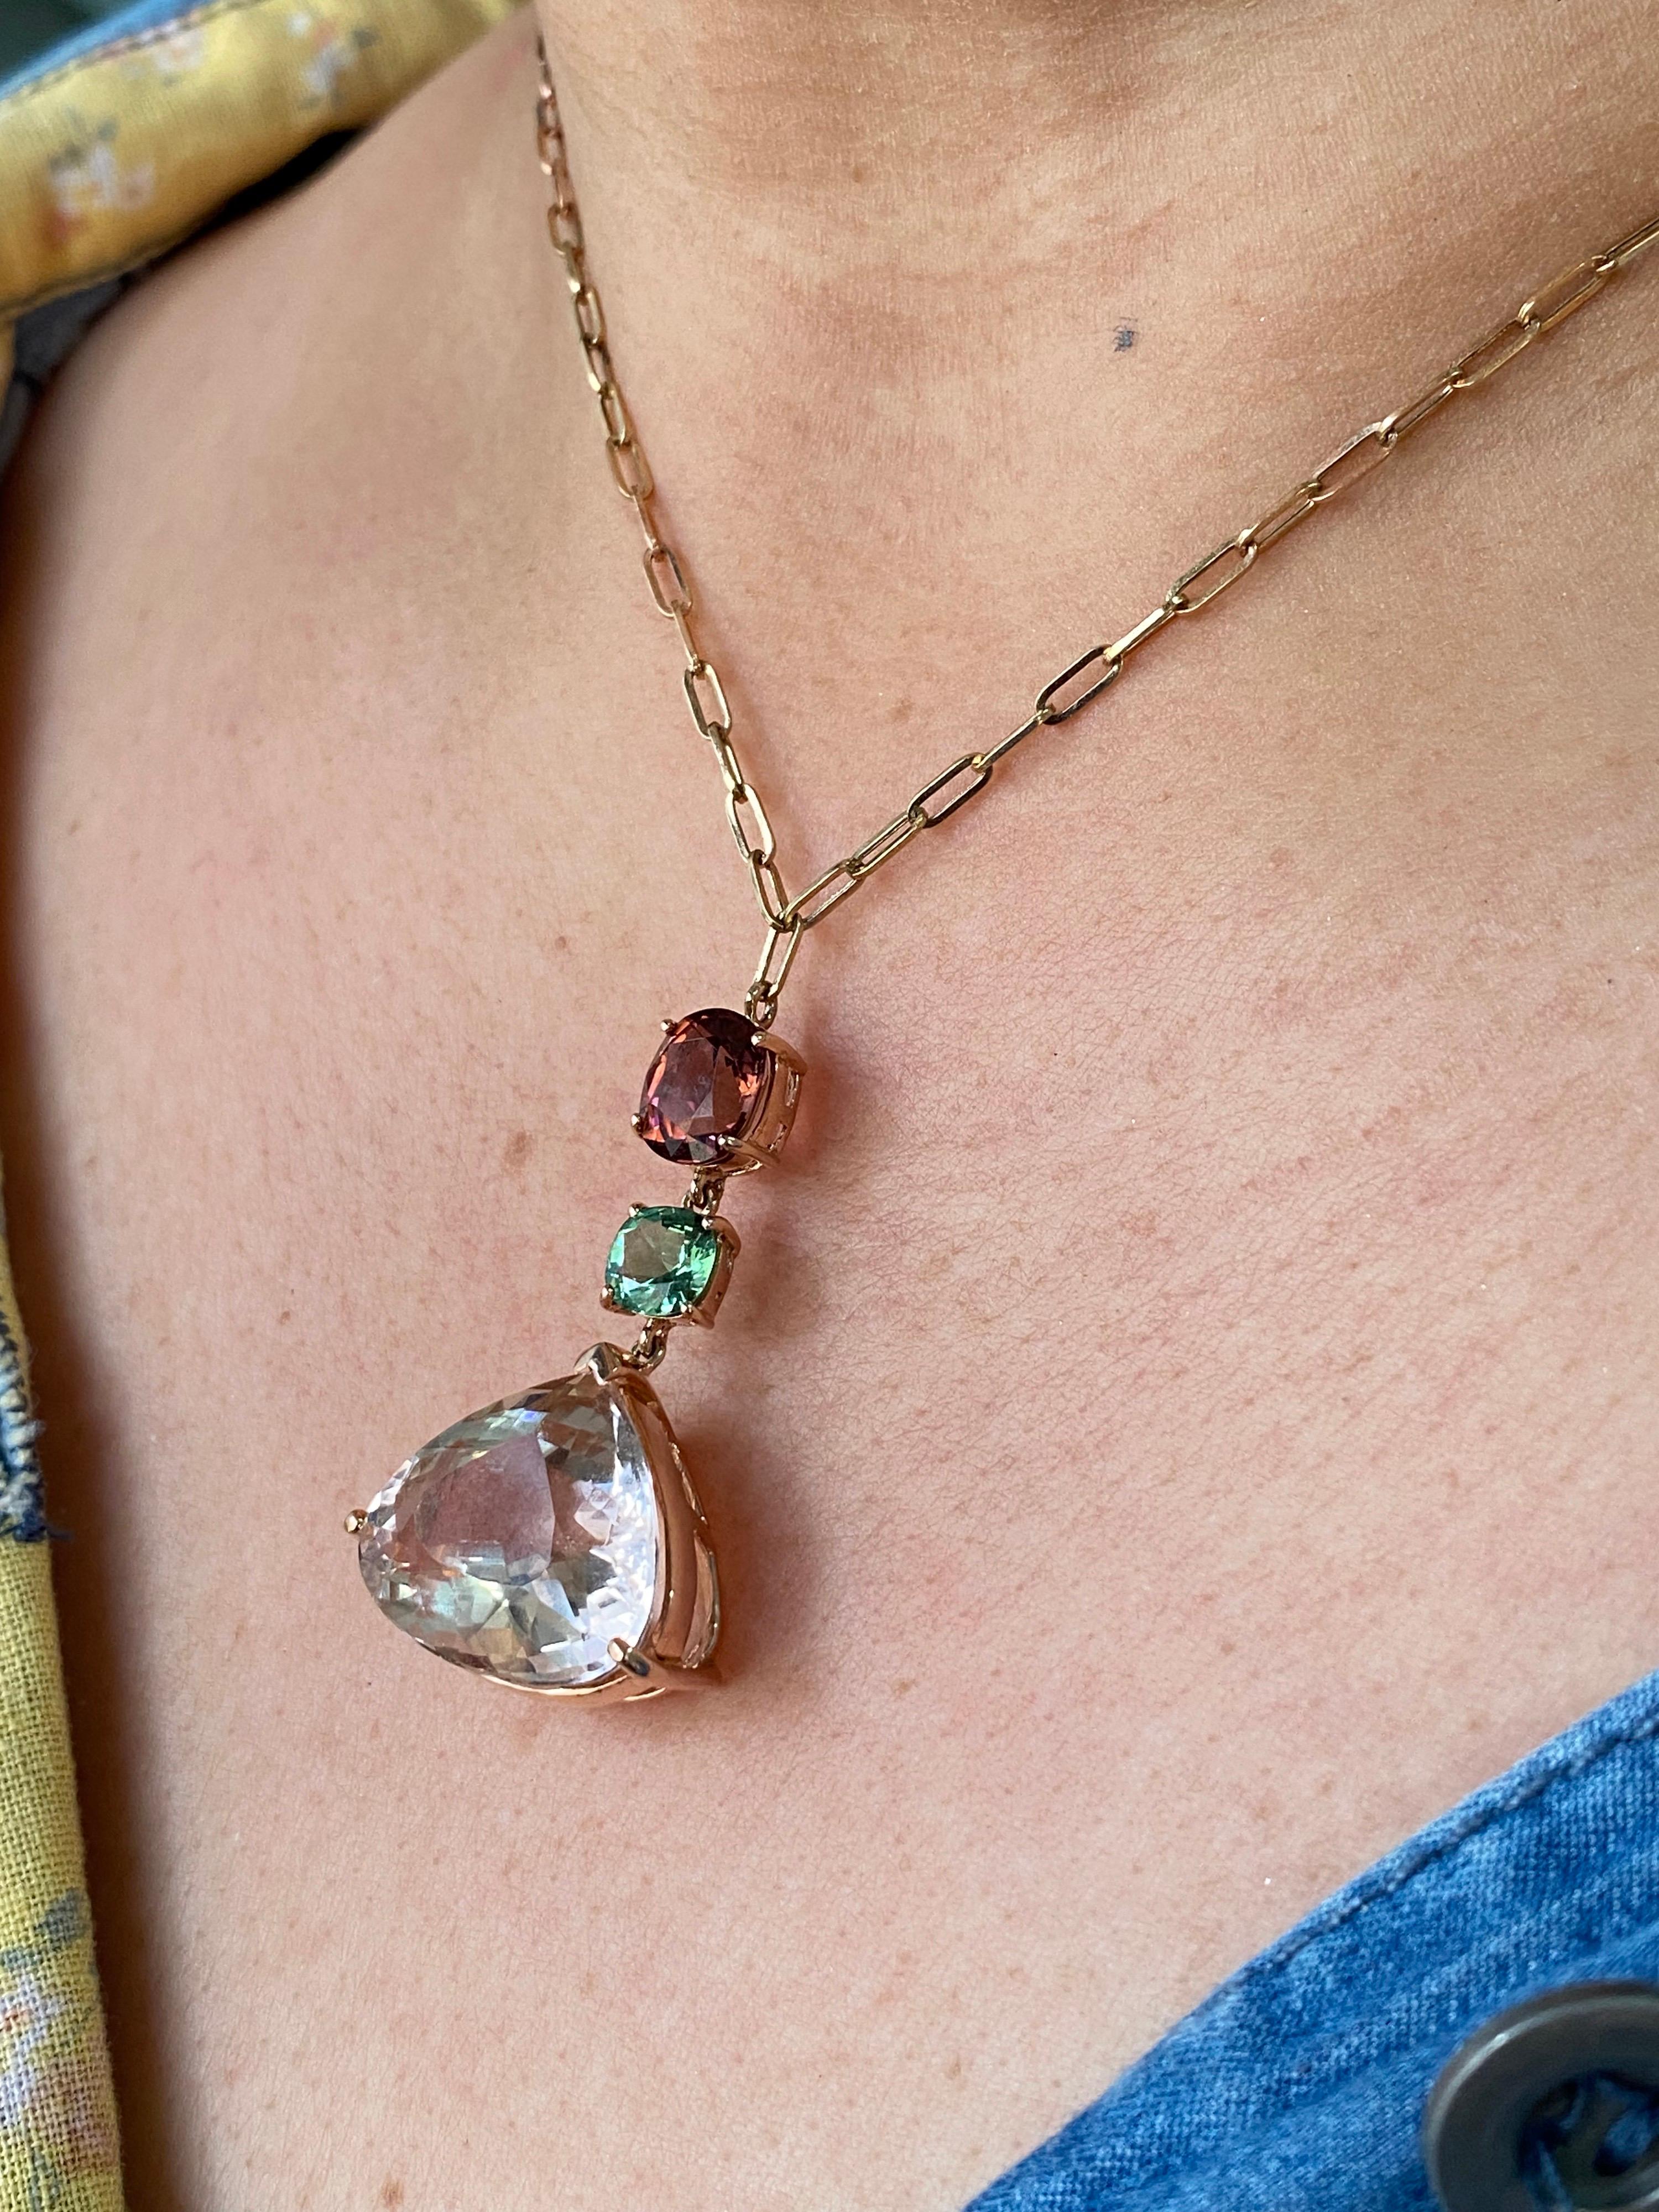 A beautiful pendant with a combination of 18.28 carat Morganite, Green Tourmaline and Rubellite, all set in solid 18K Gold. The link chain is also made of 18K Gold, and is 16 inches long. There is a pair of matching earrings available as well. The